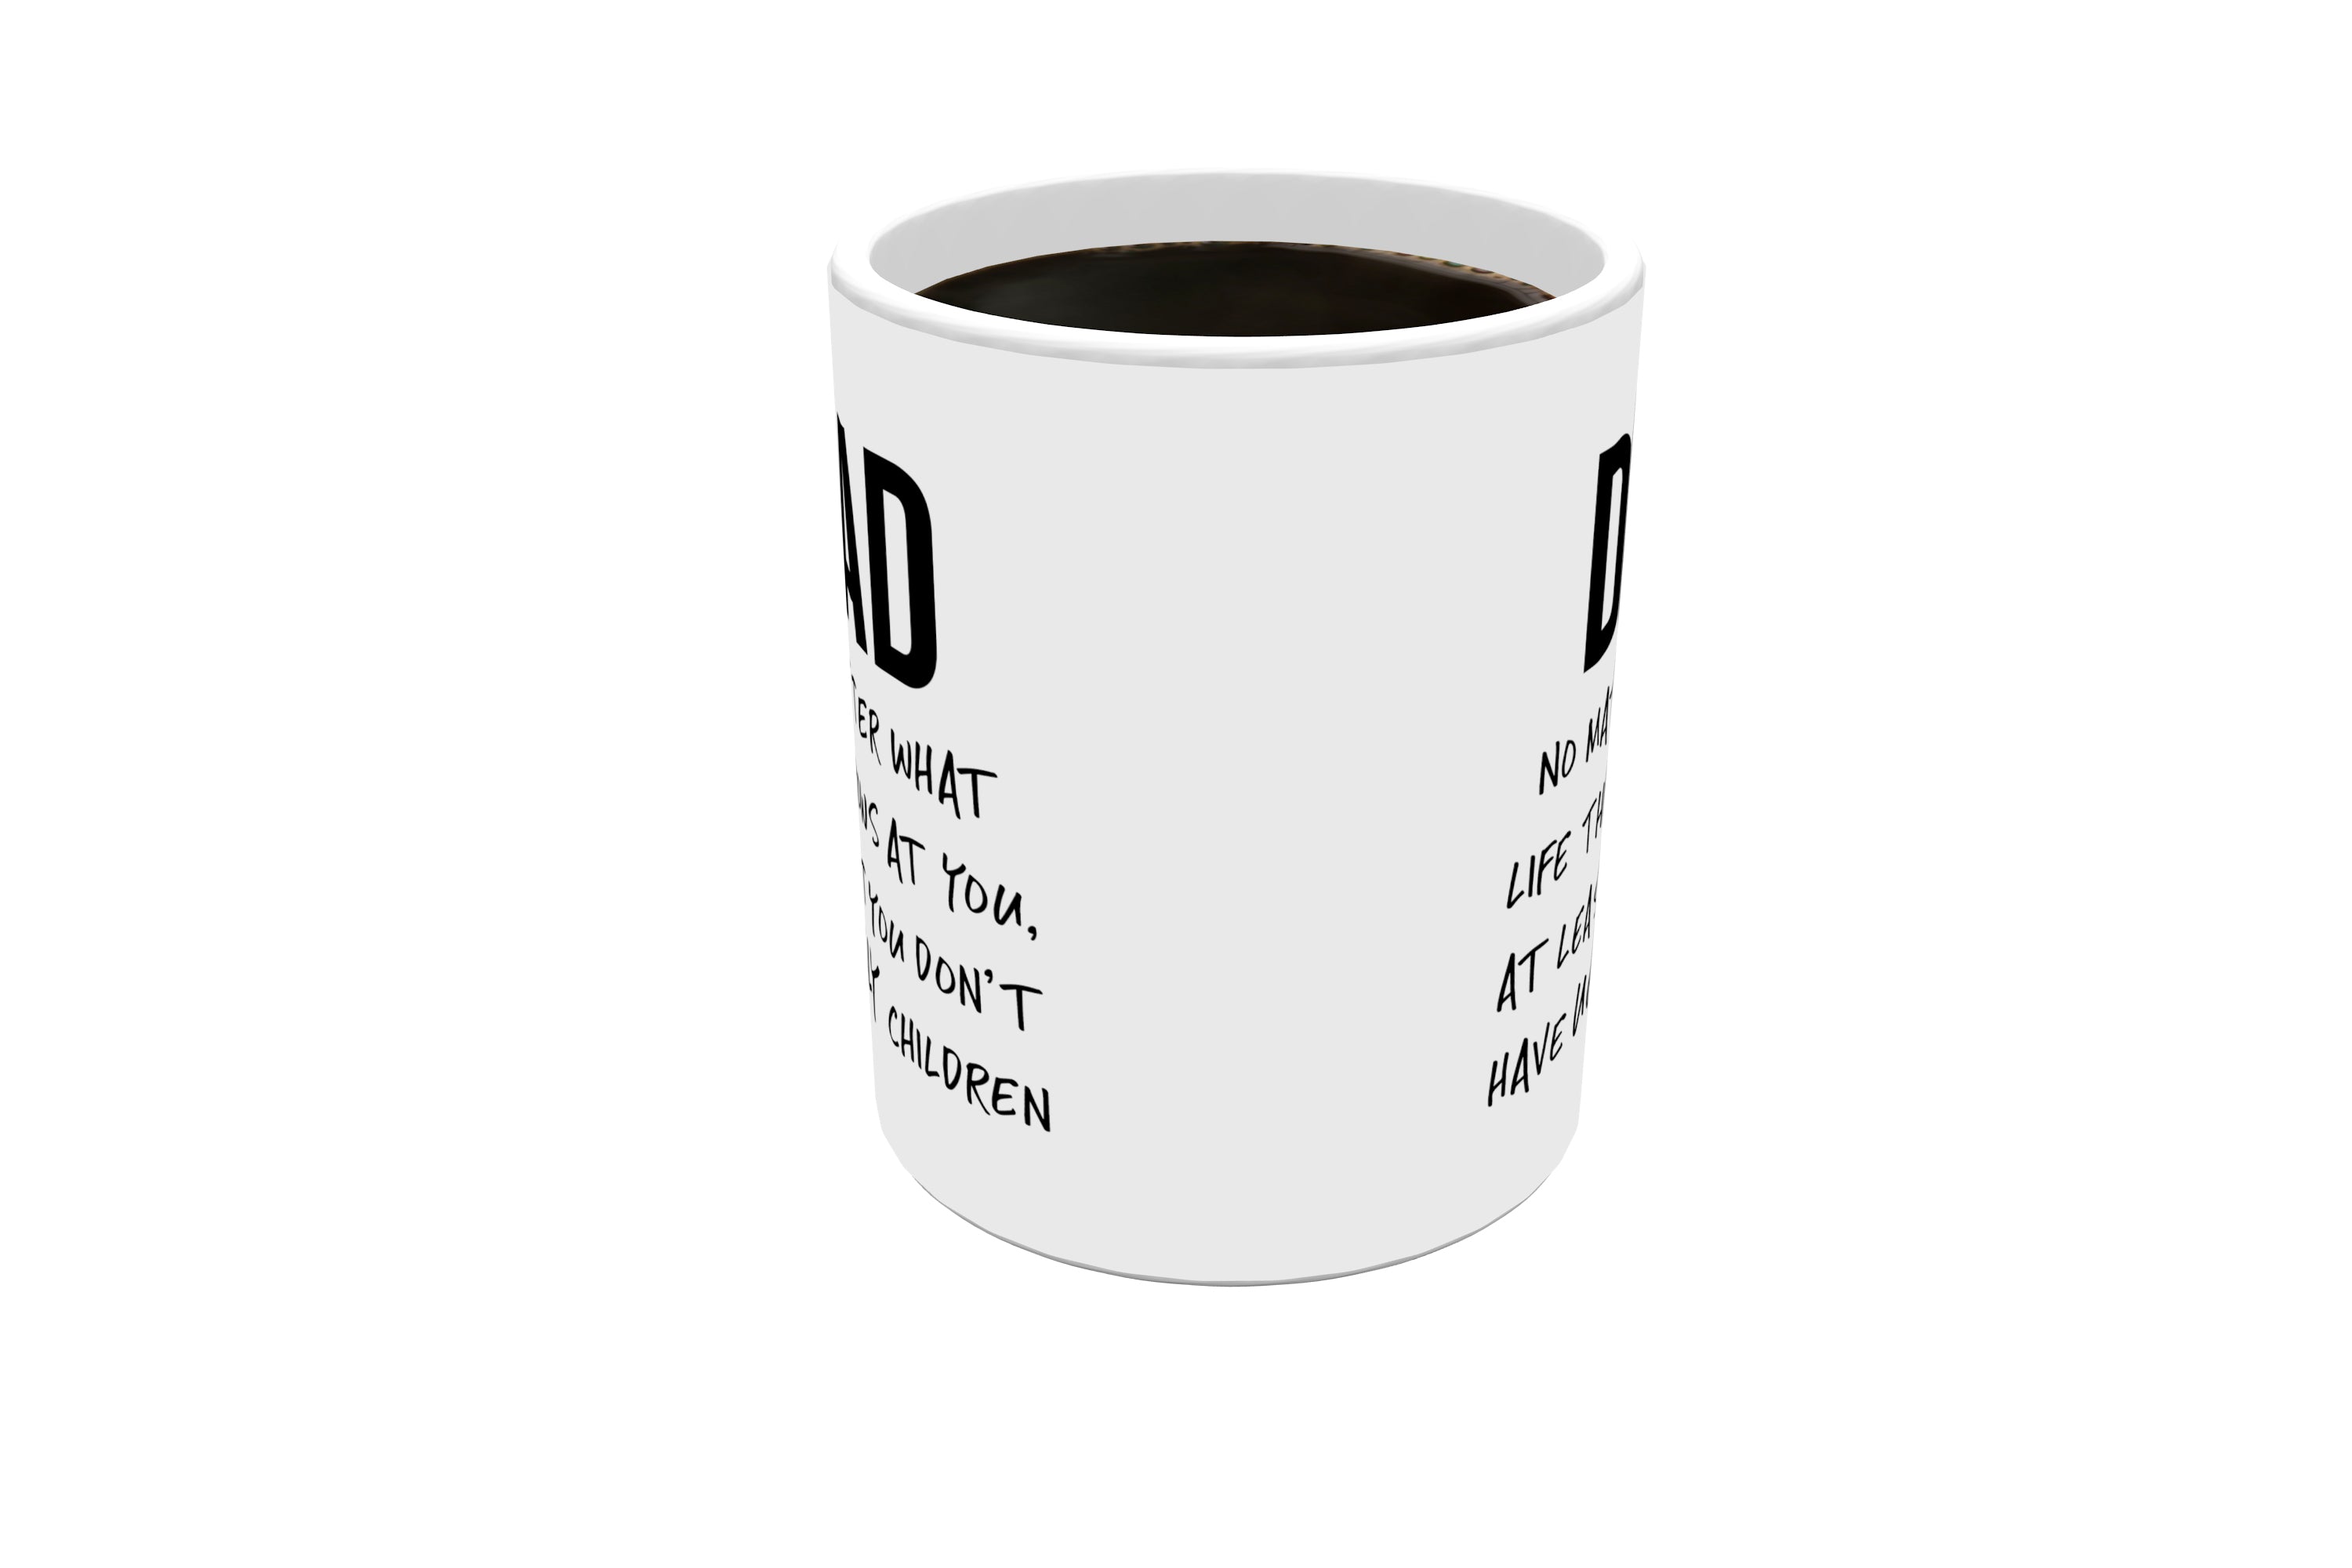 Parents Collection (Father's Day - No Ugly Children) 11 oz White Ceramic Mug